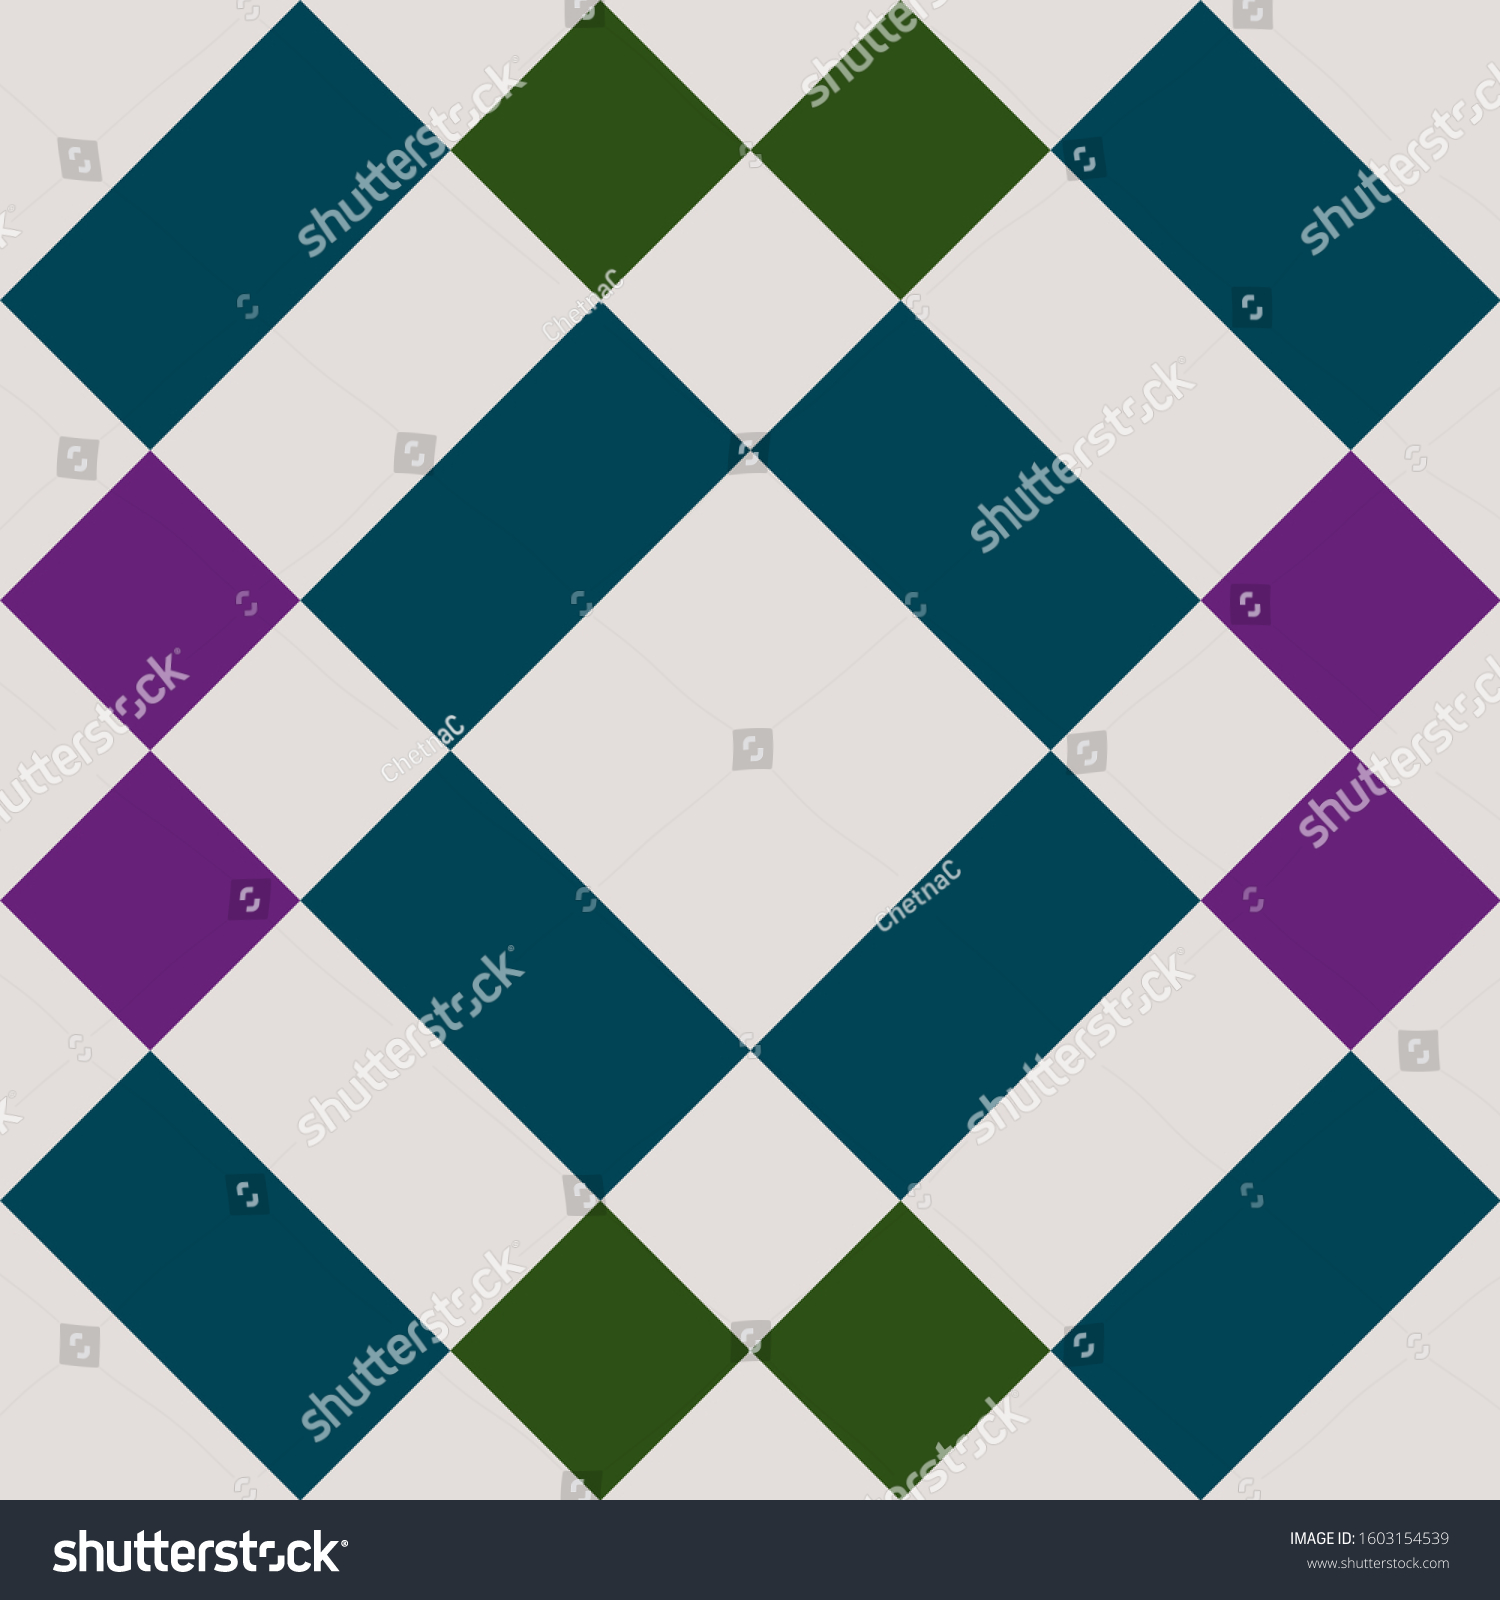 SVG of Barn quilt pattern, Amish Patchwork design, Abstract geometric tiled trail, Square block Vector illustration svg